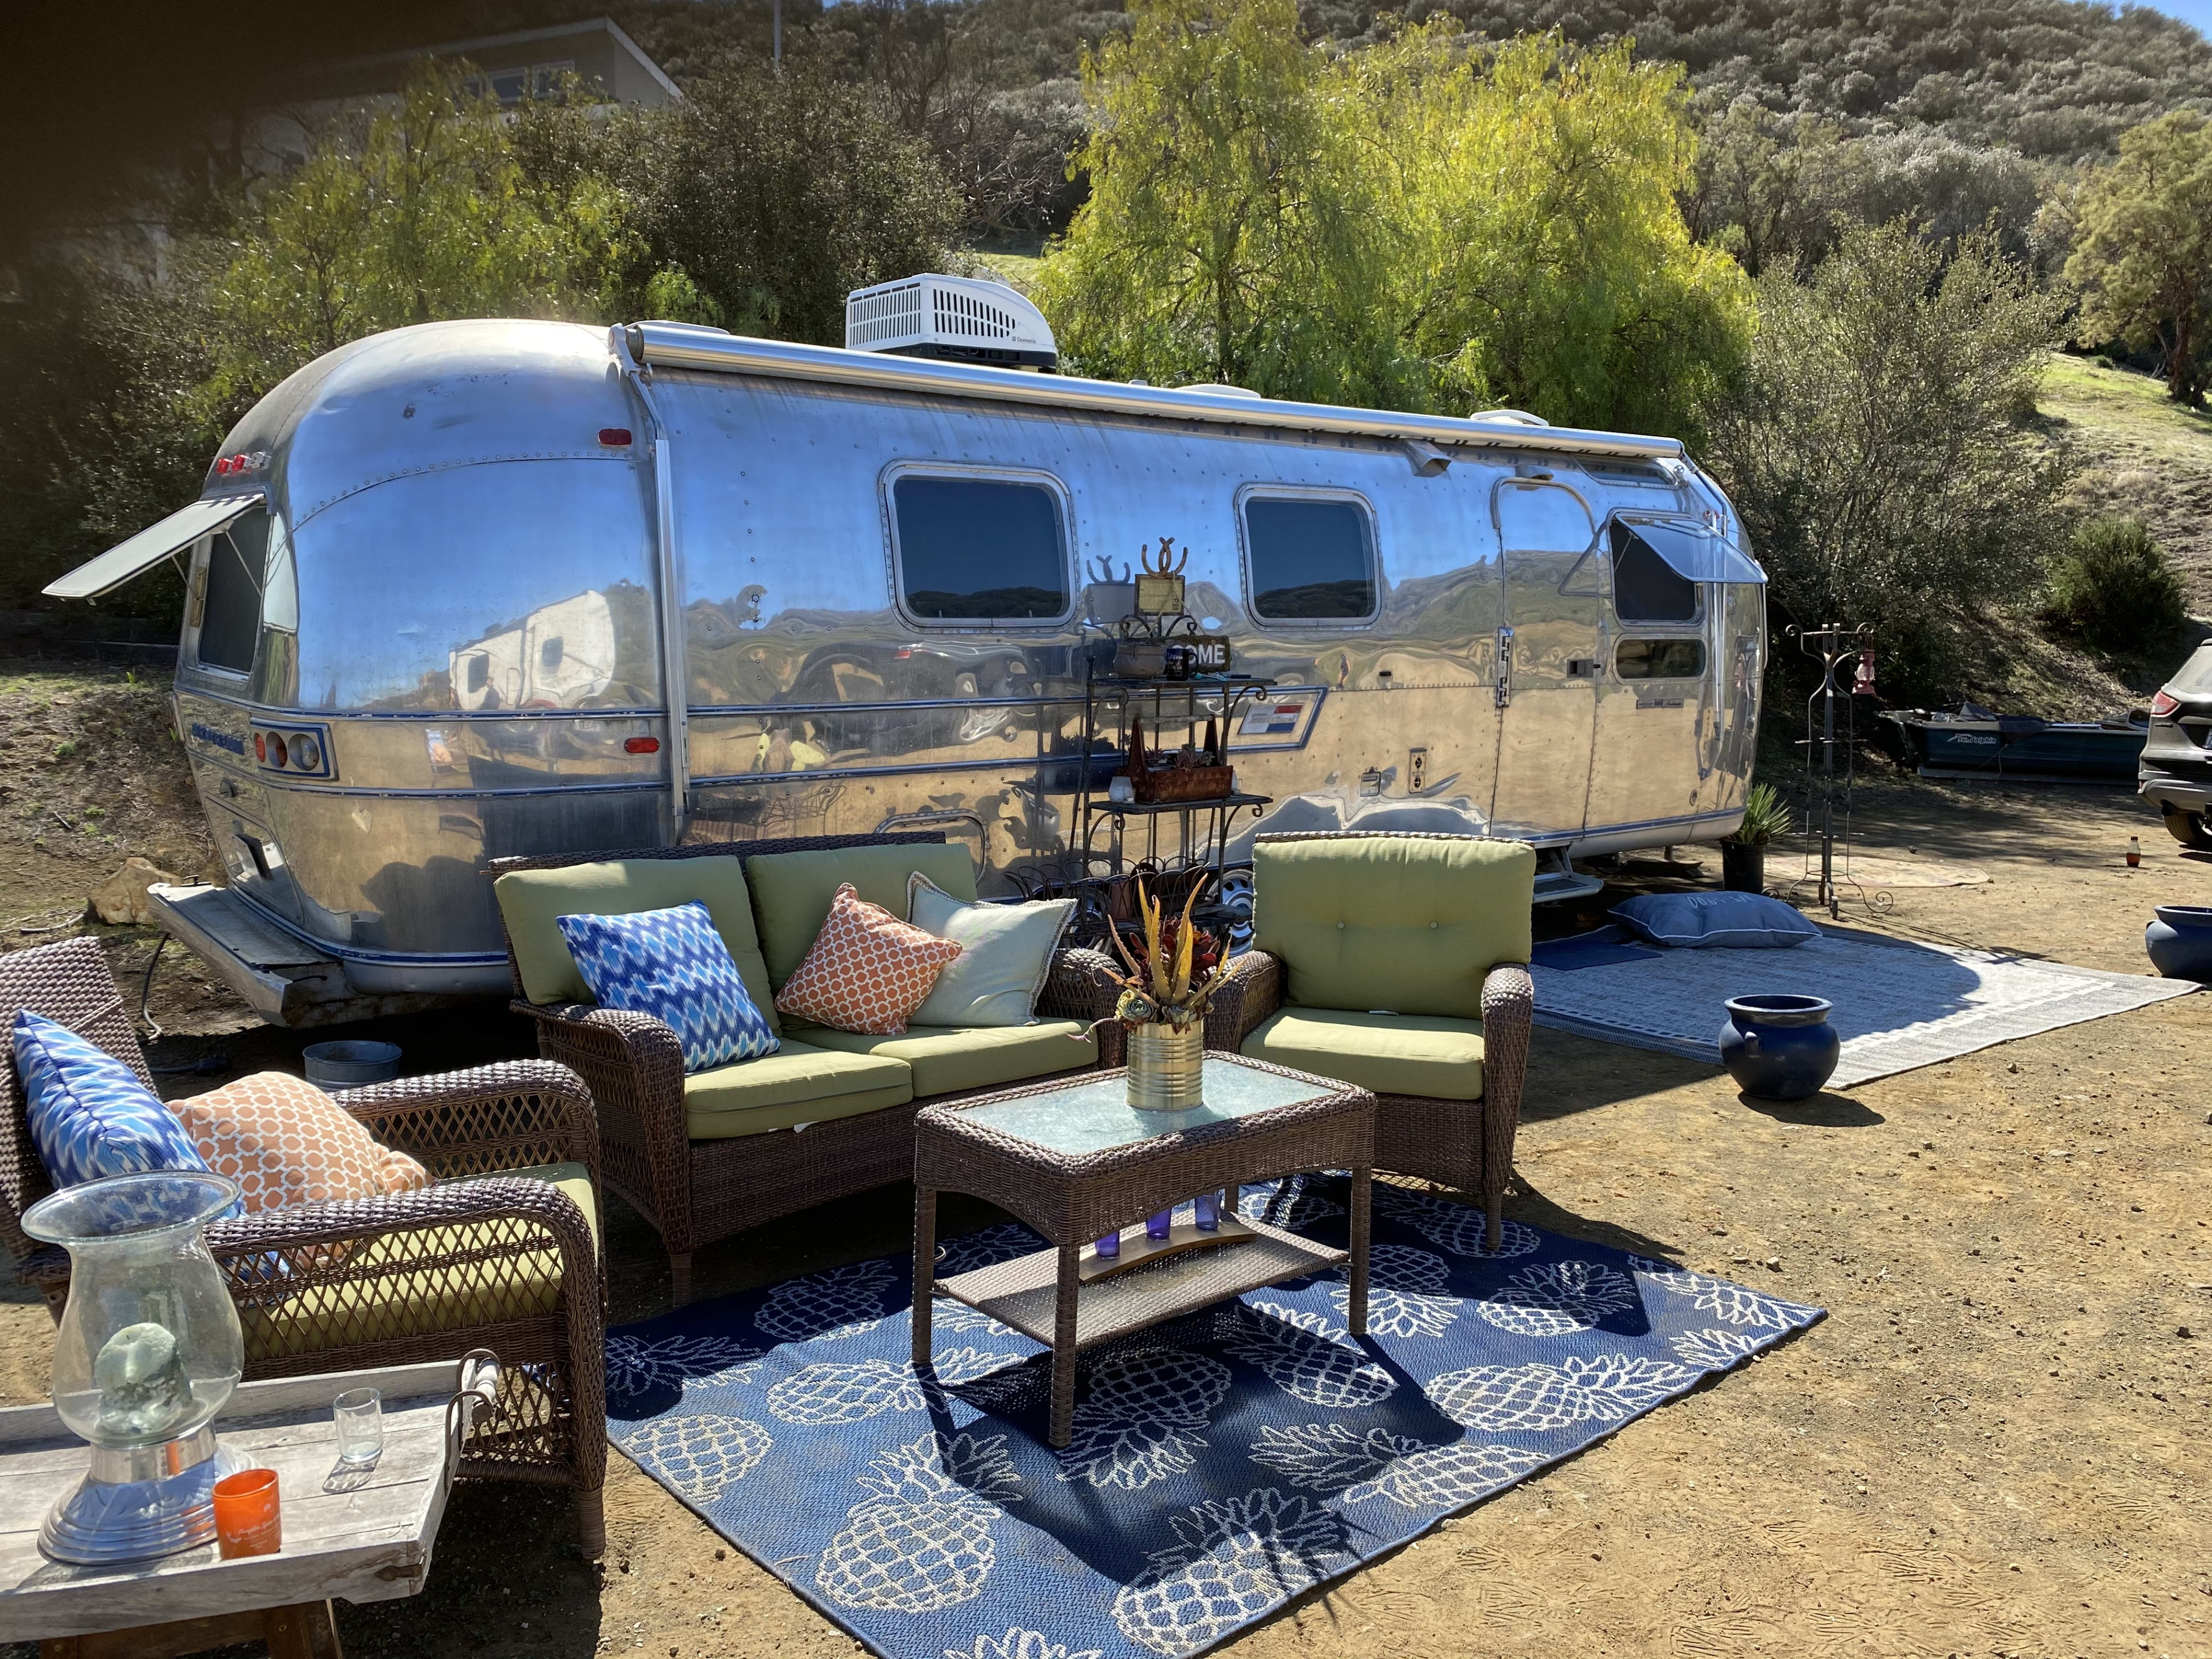 Meet FEARLESS MARY, our Vintage Airstream